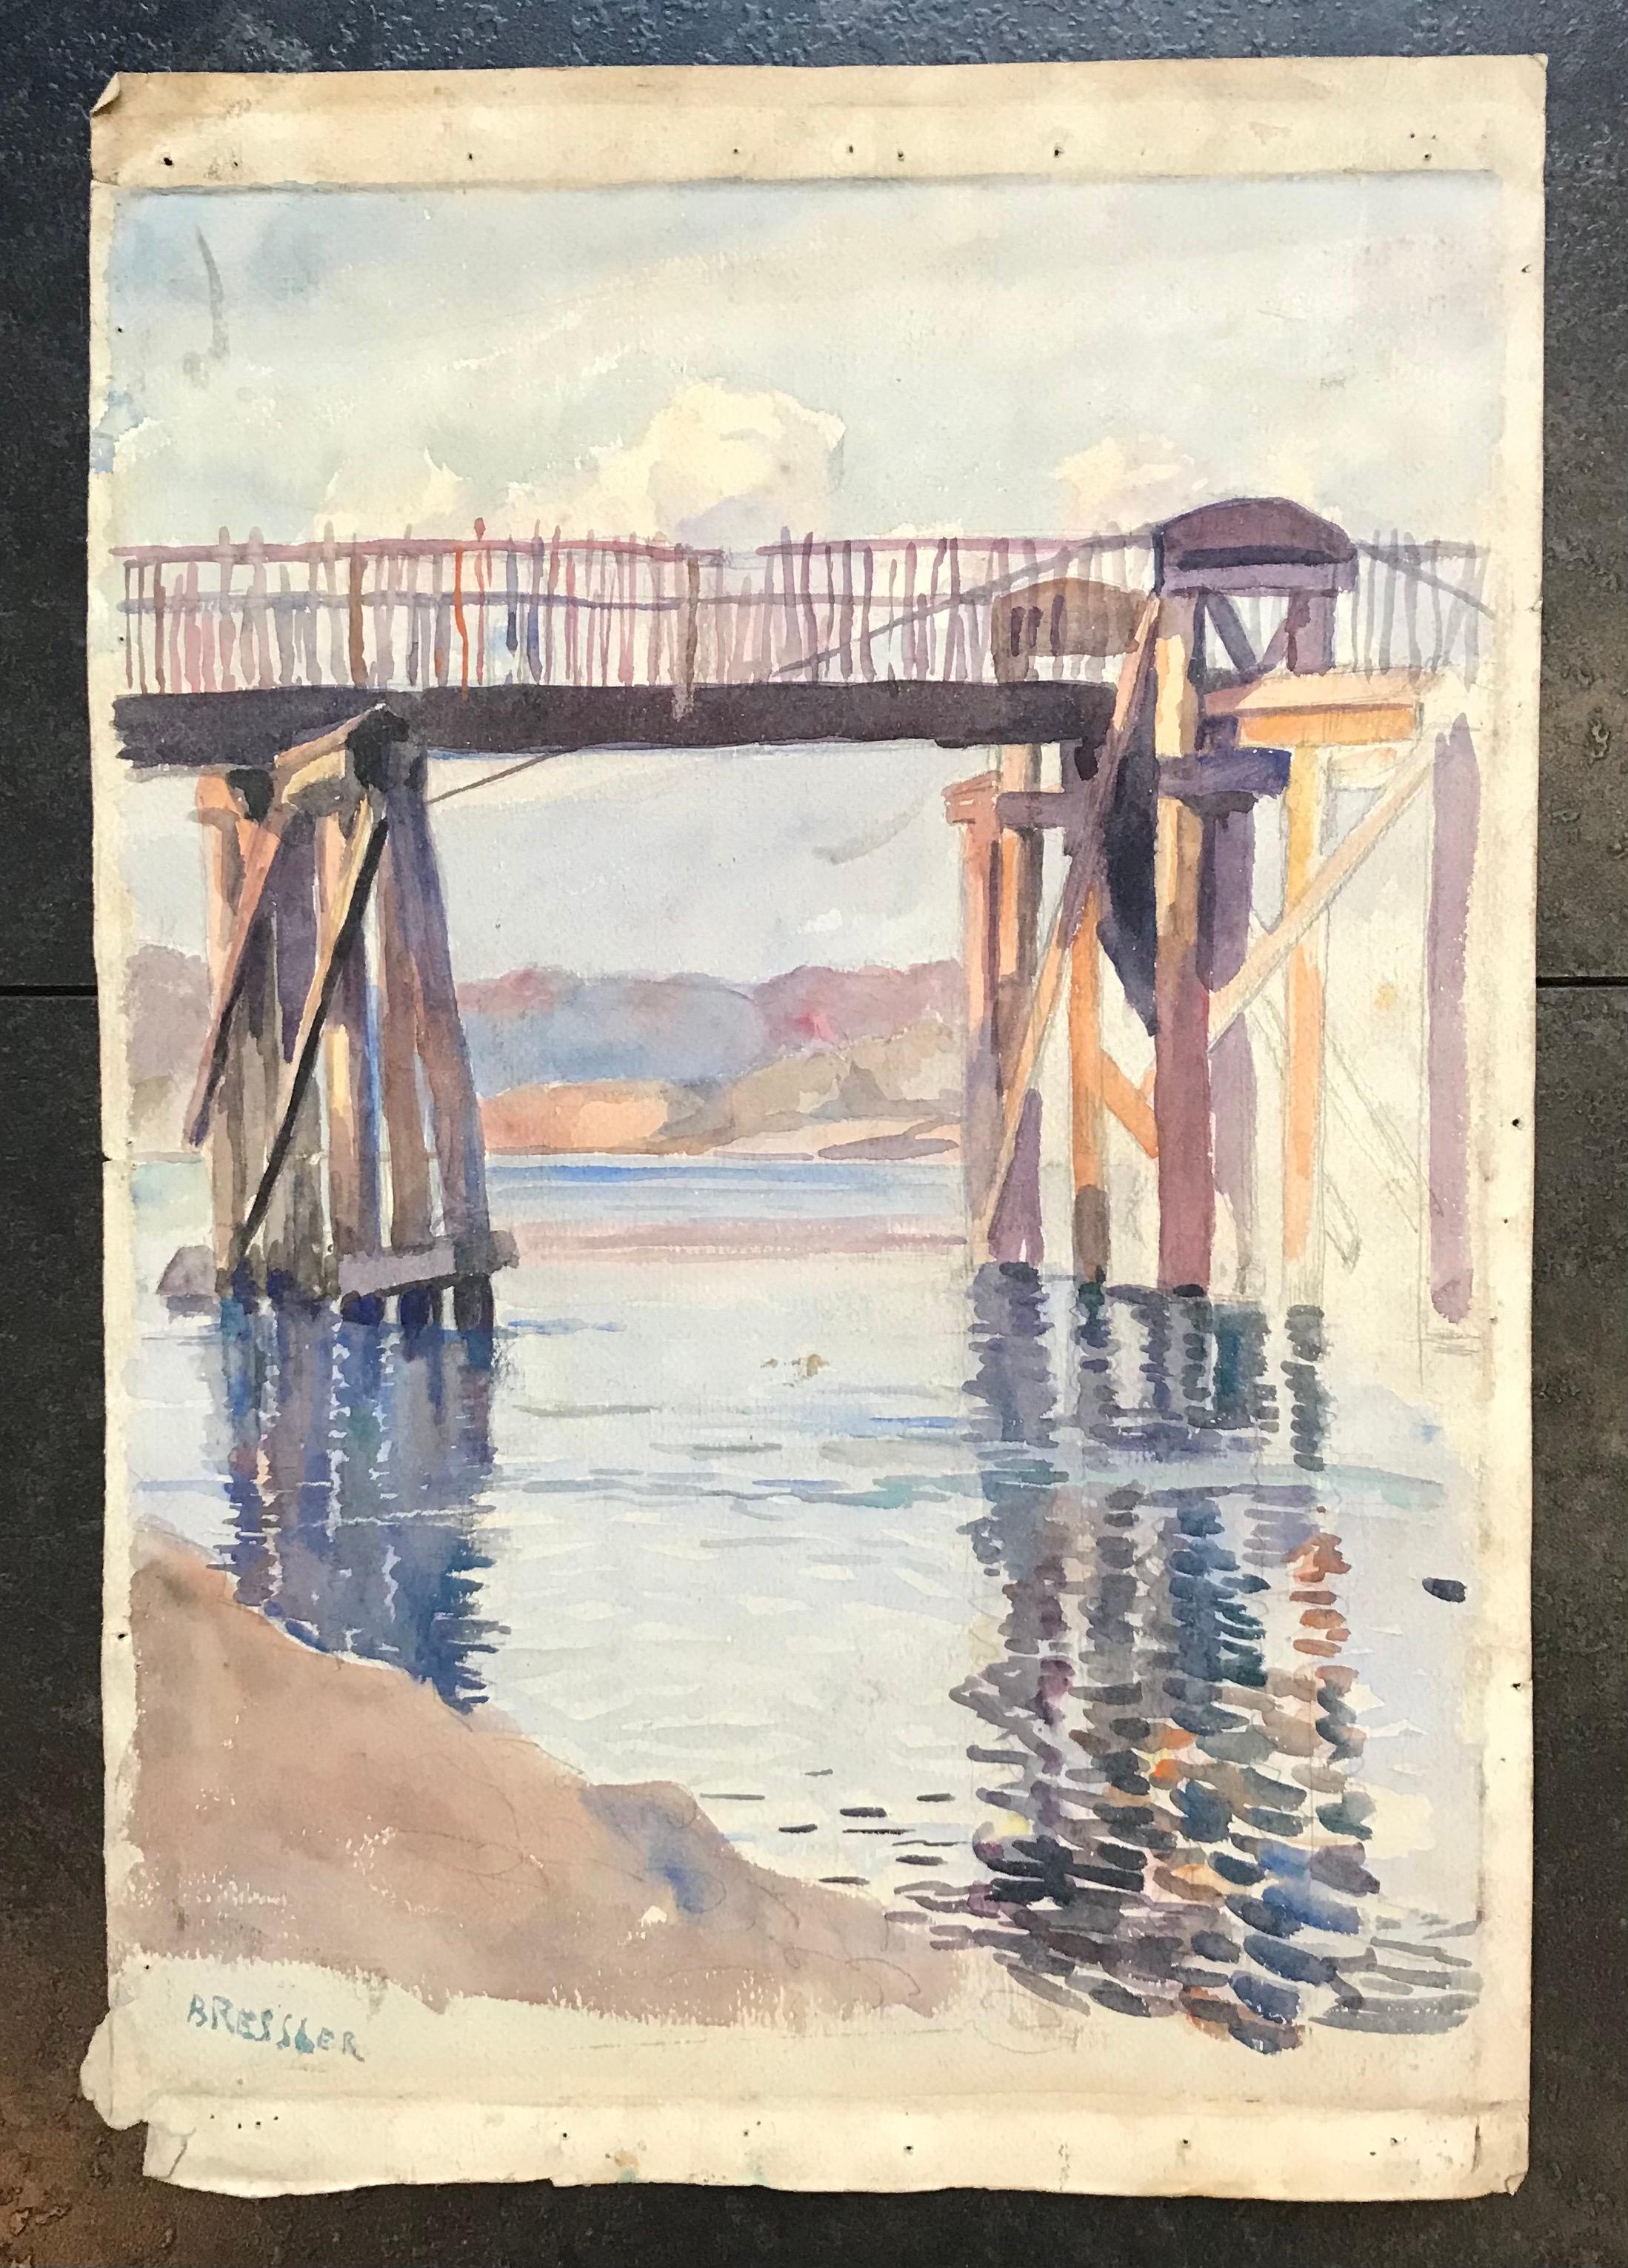 Study of a Bridge - Painting by Emile Bressler